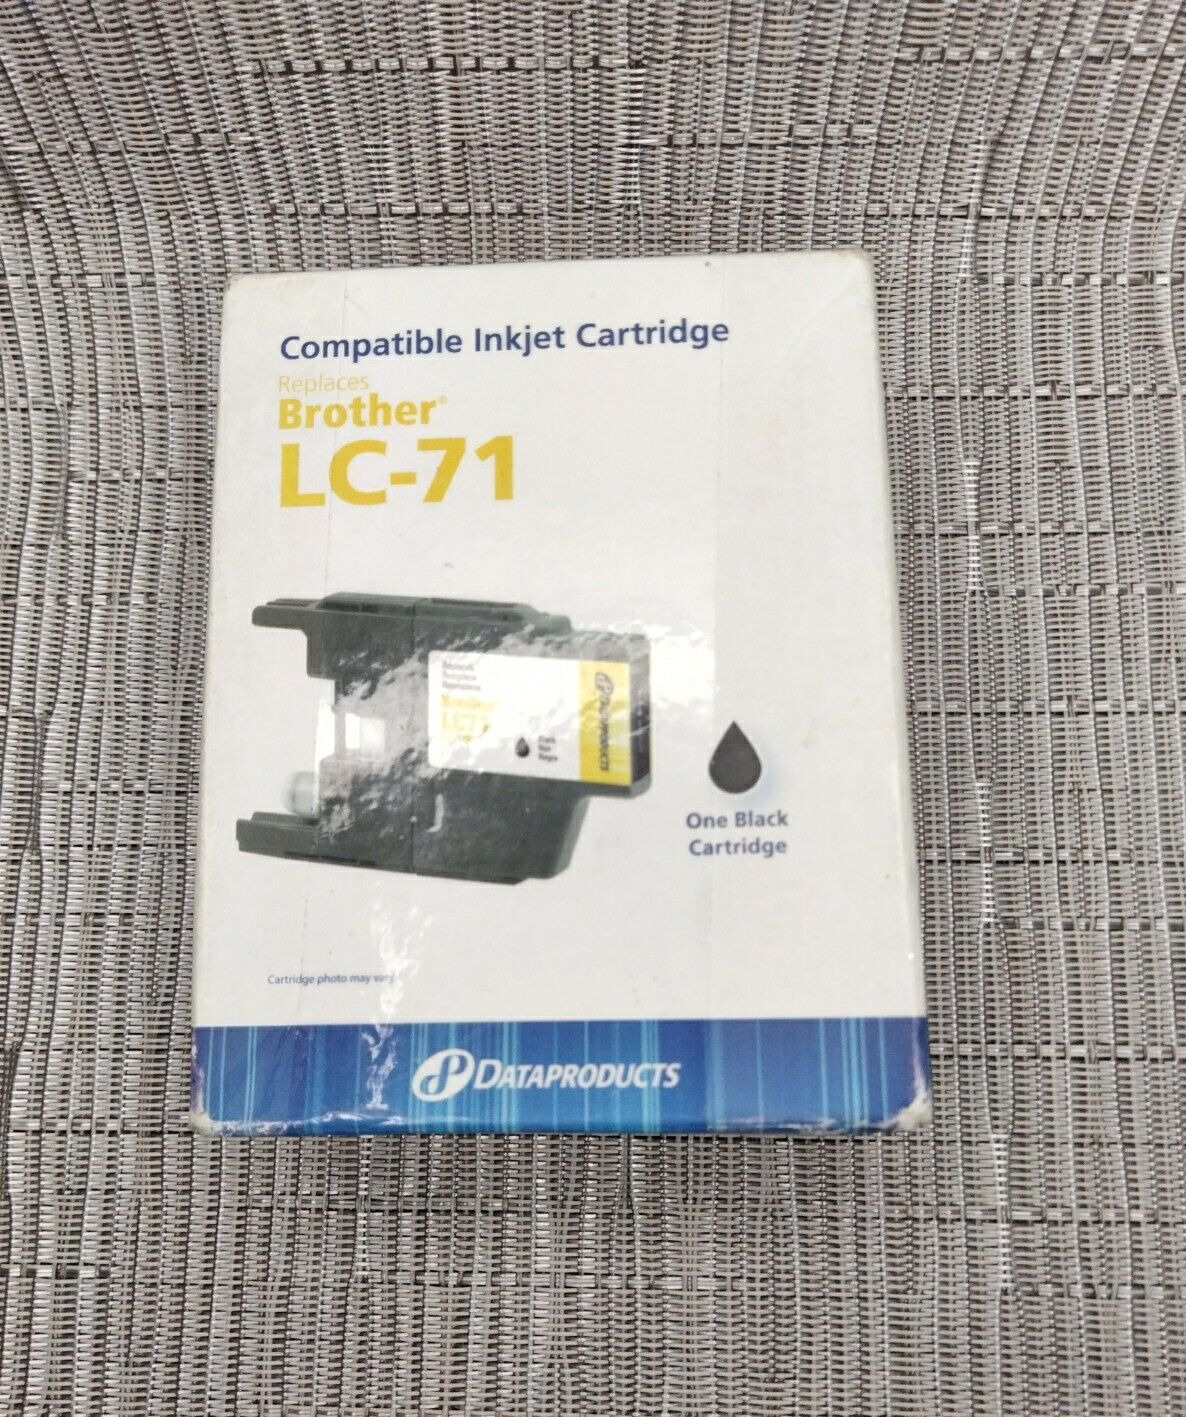 Dataproducts Standard Ink Cartridge Compatible with Brother LC 71 Series, Black